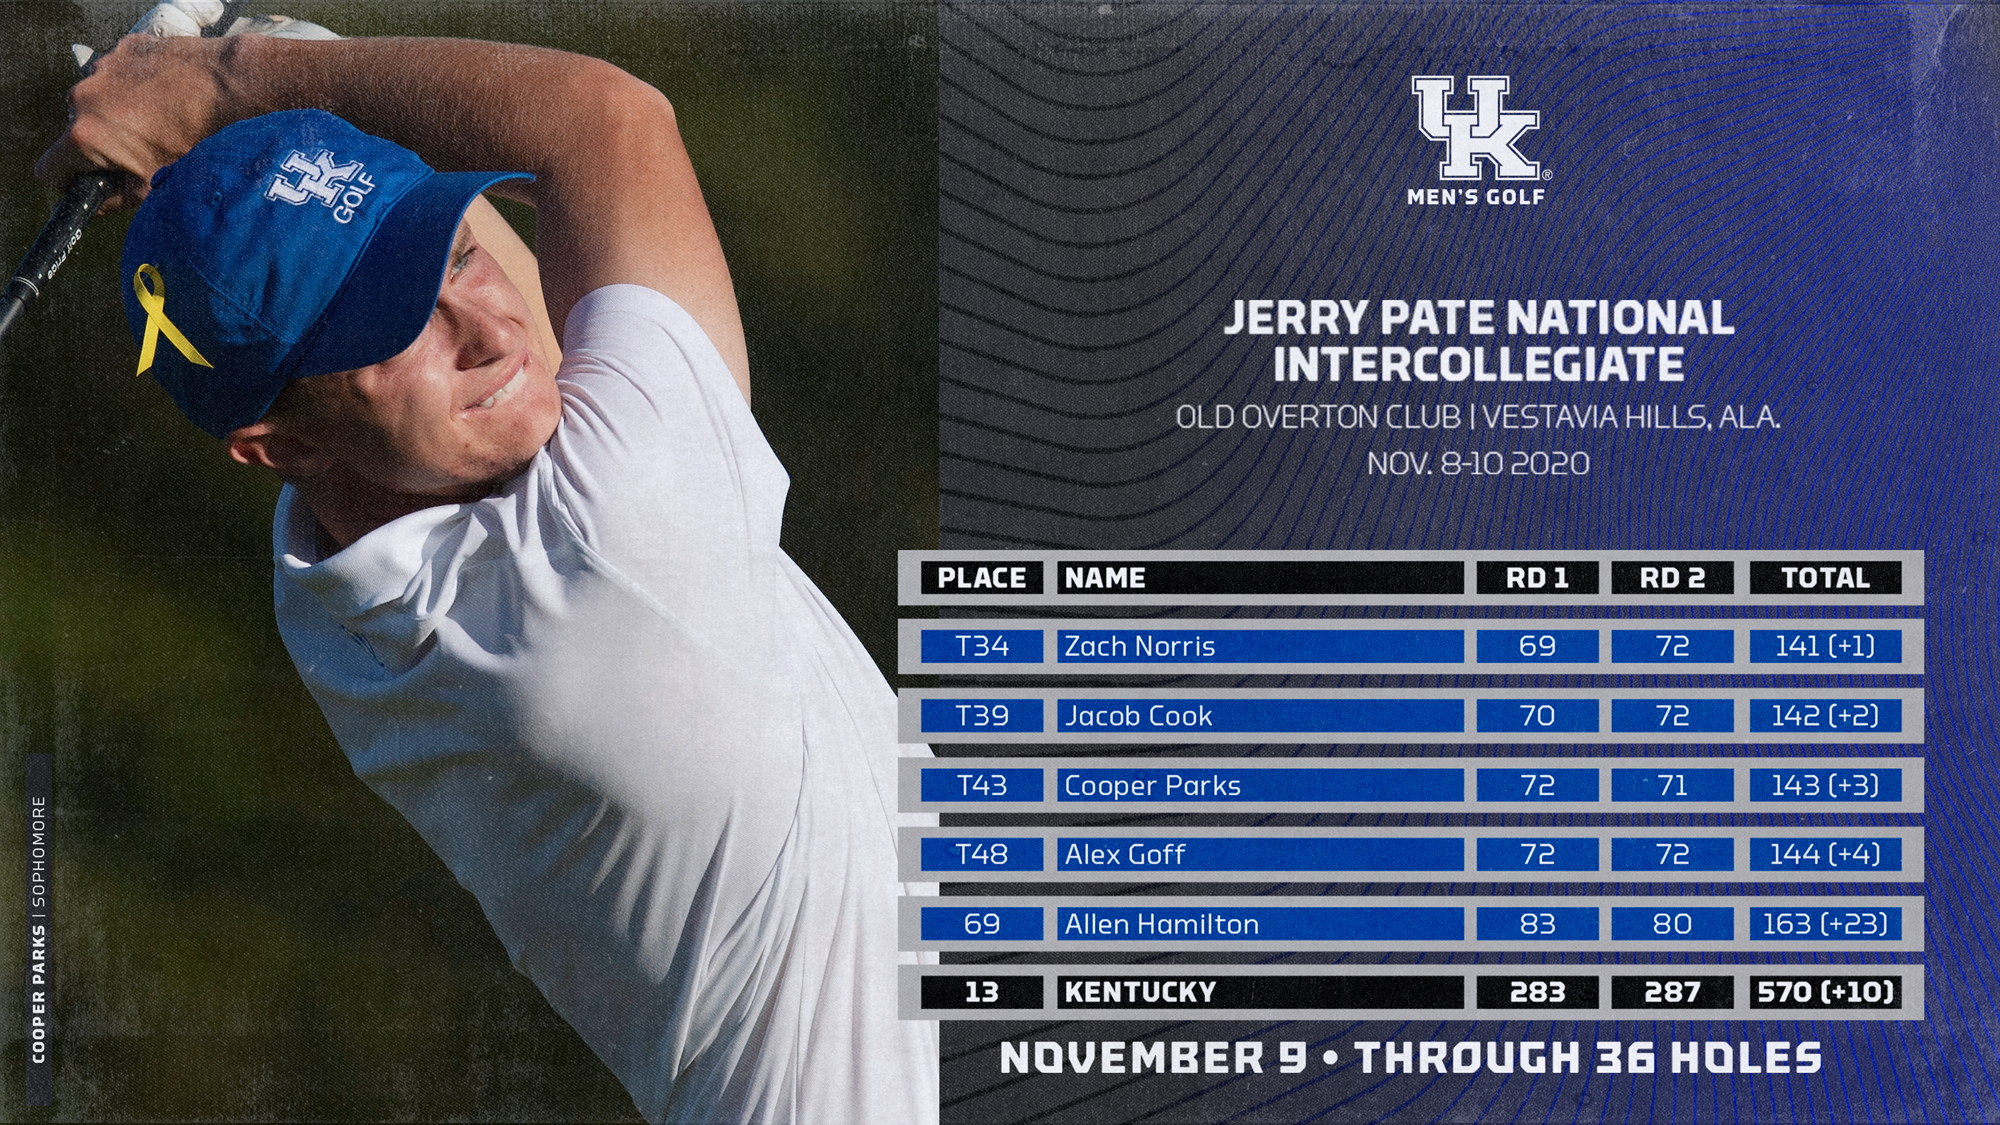 Parks Paces Second Day at Jerry Pate National for UK